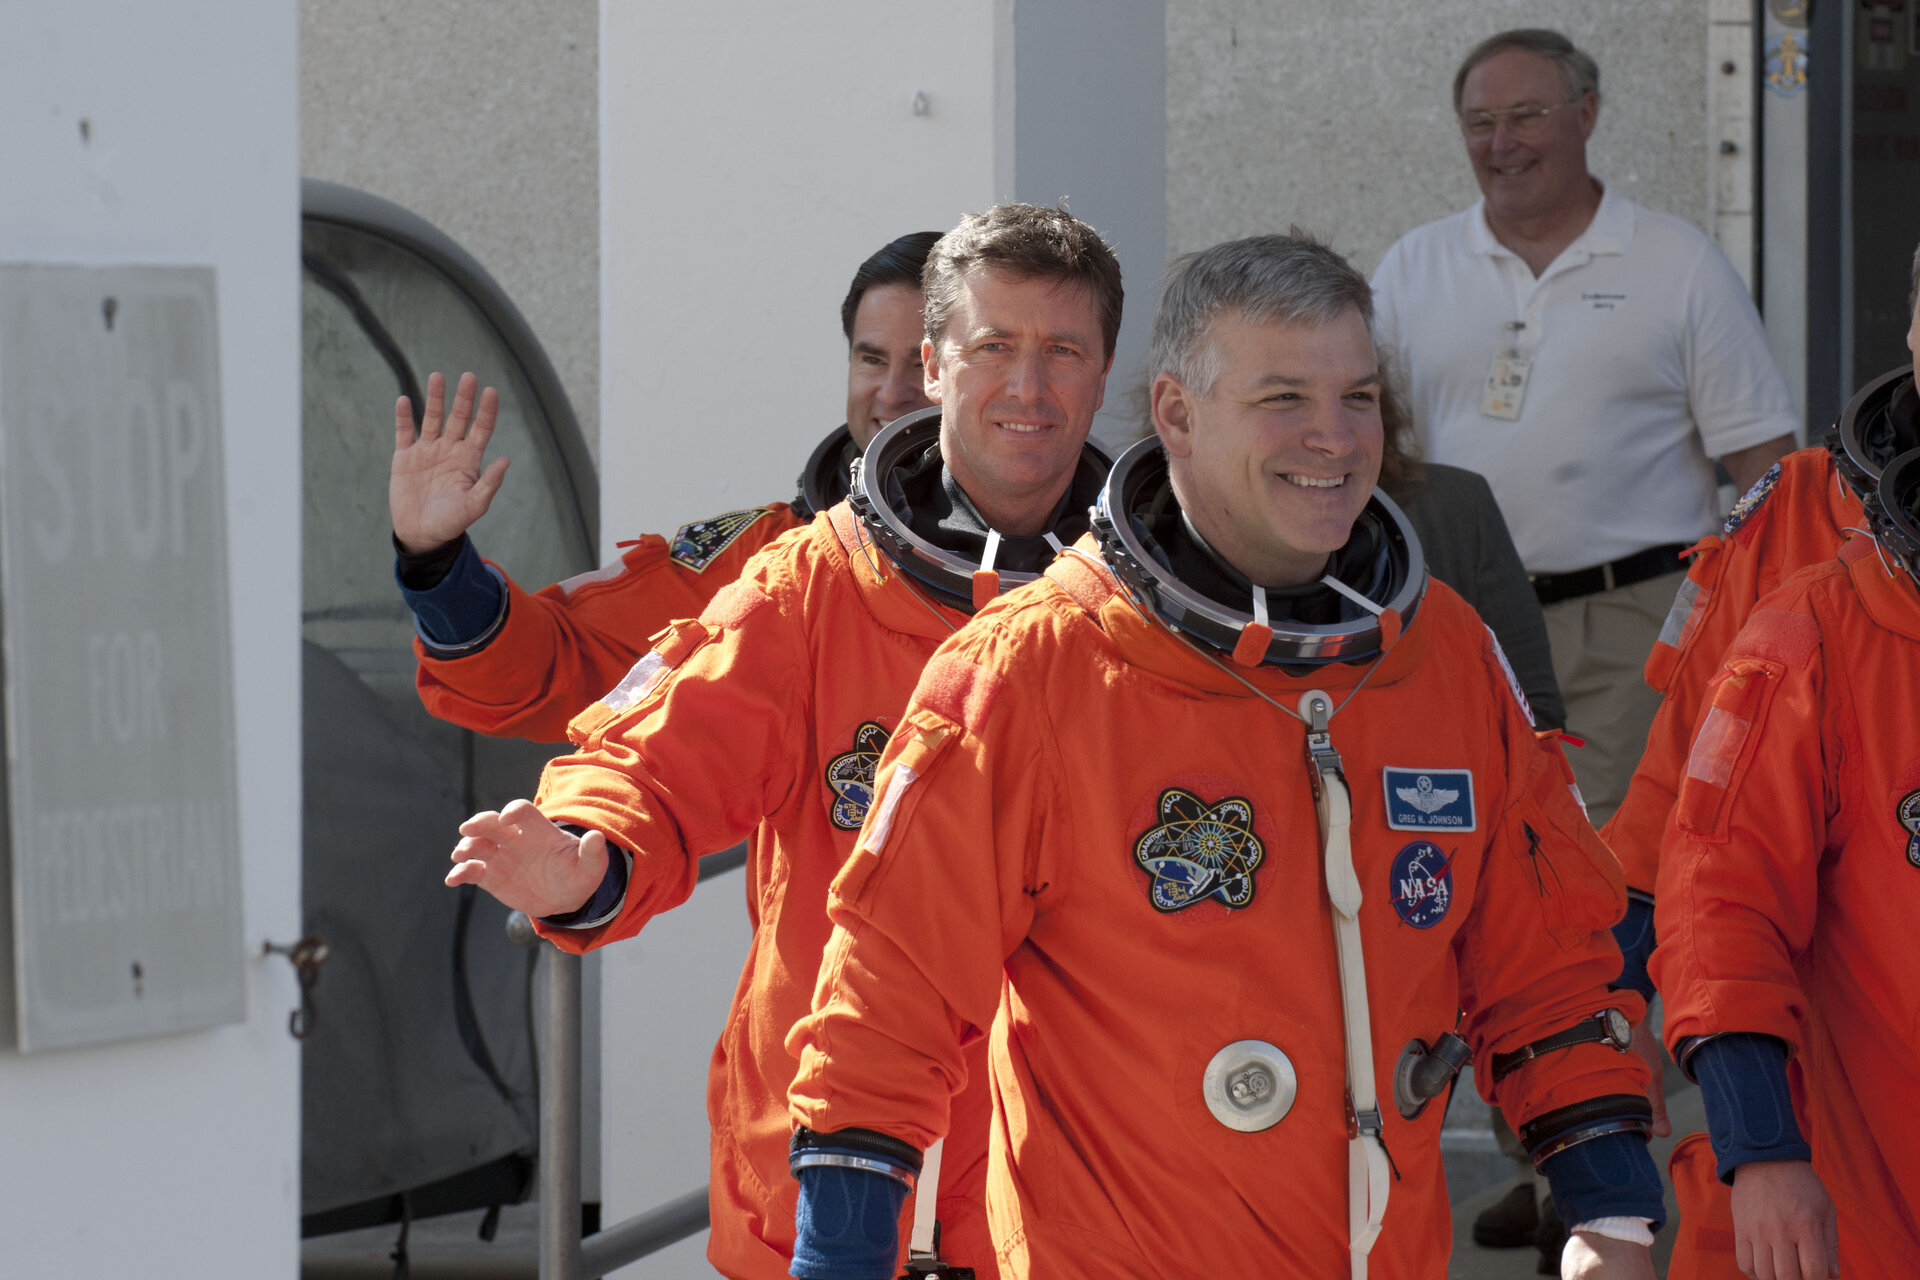 The STS-134 crew during simulated launch countdown exercise